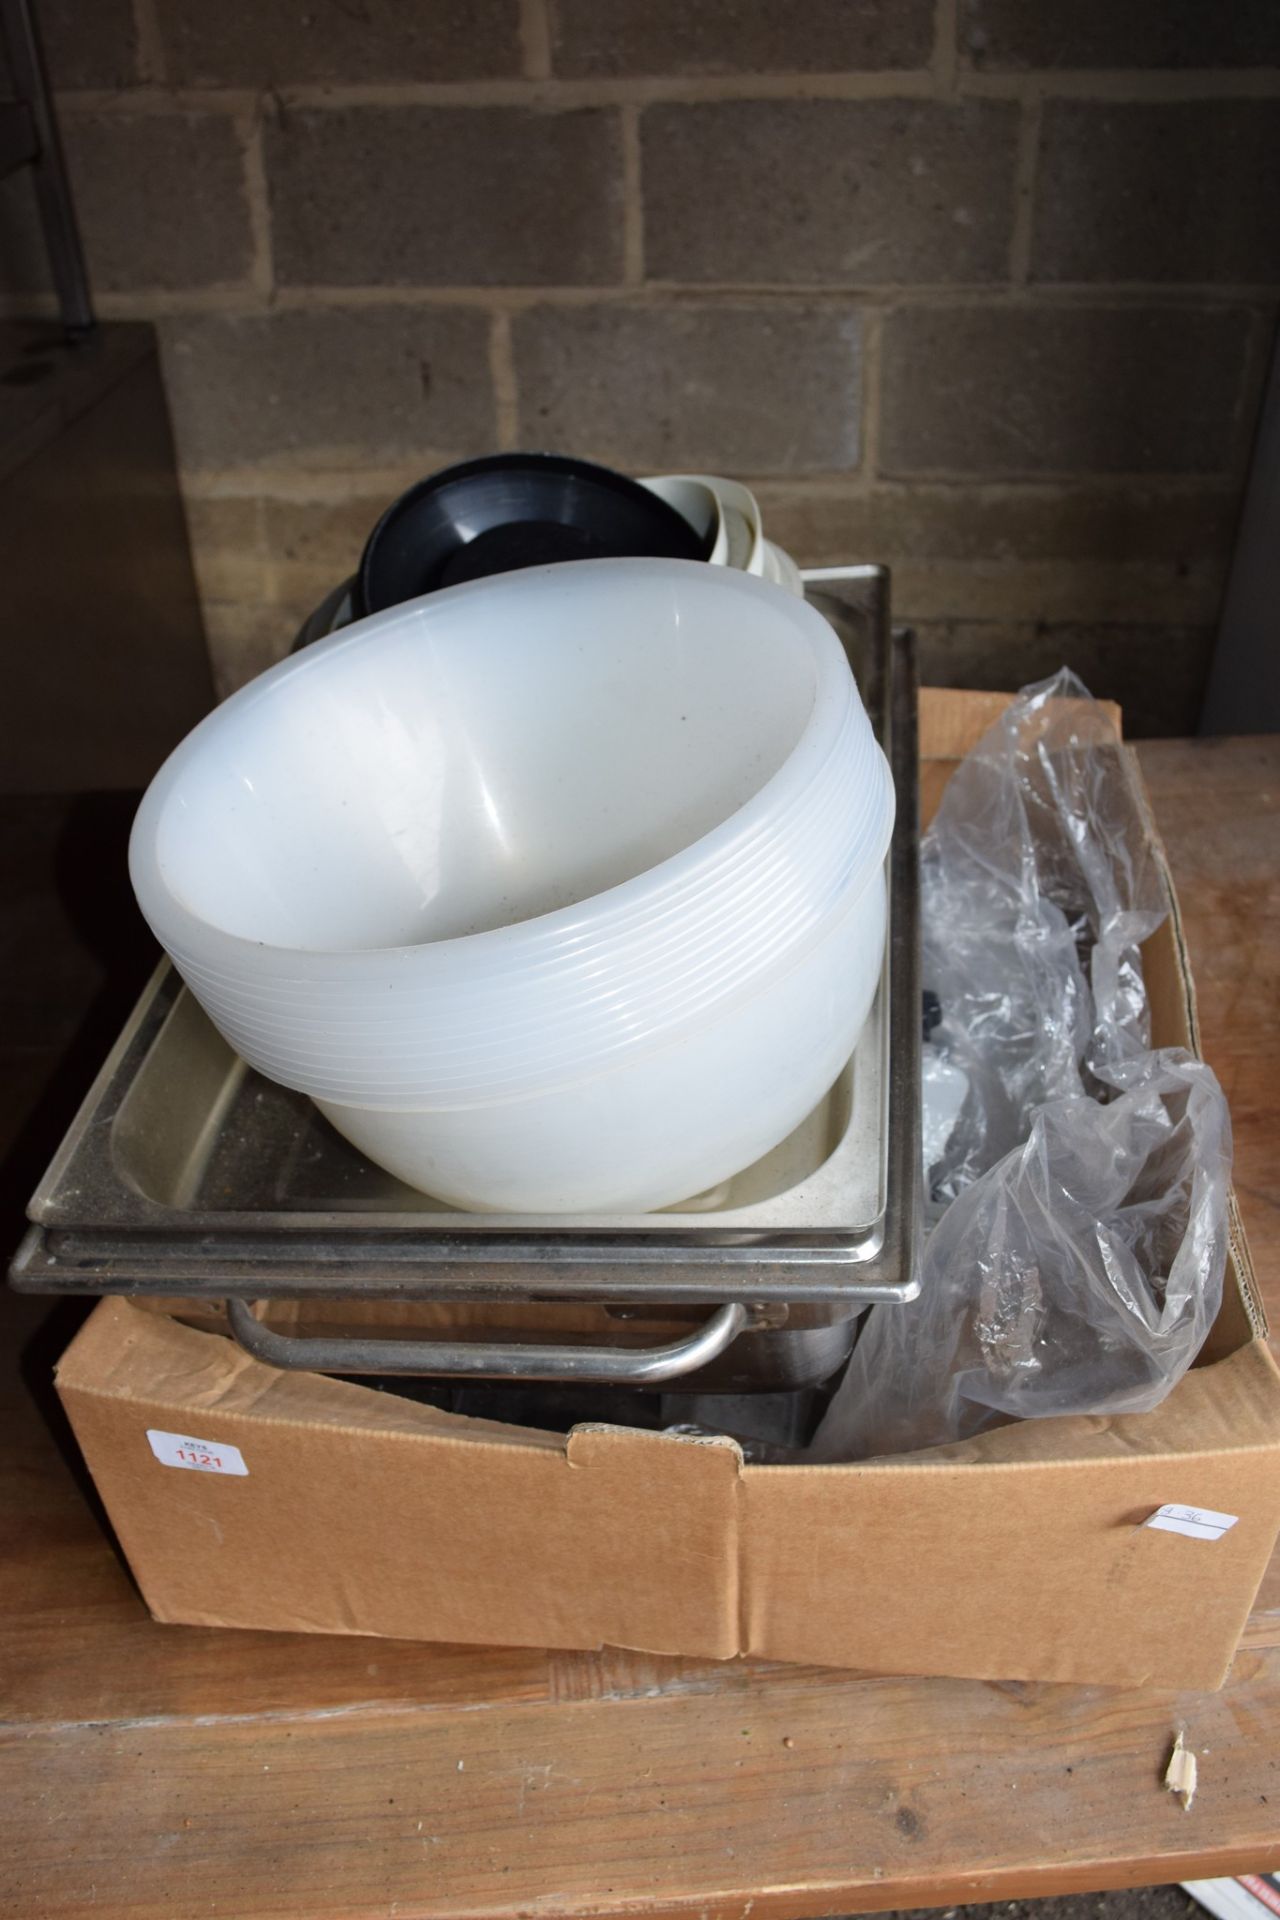 Qty various Kitchne Sundries, incl qty plastic Mixing Bowls, stainless steel rectangular Chafing - Image 2 of 2